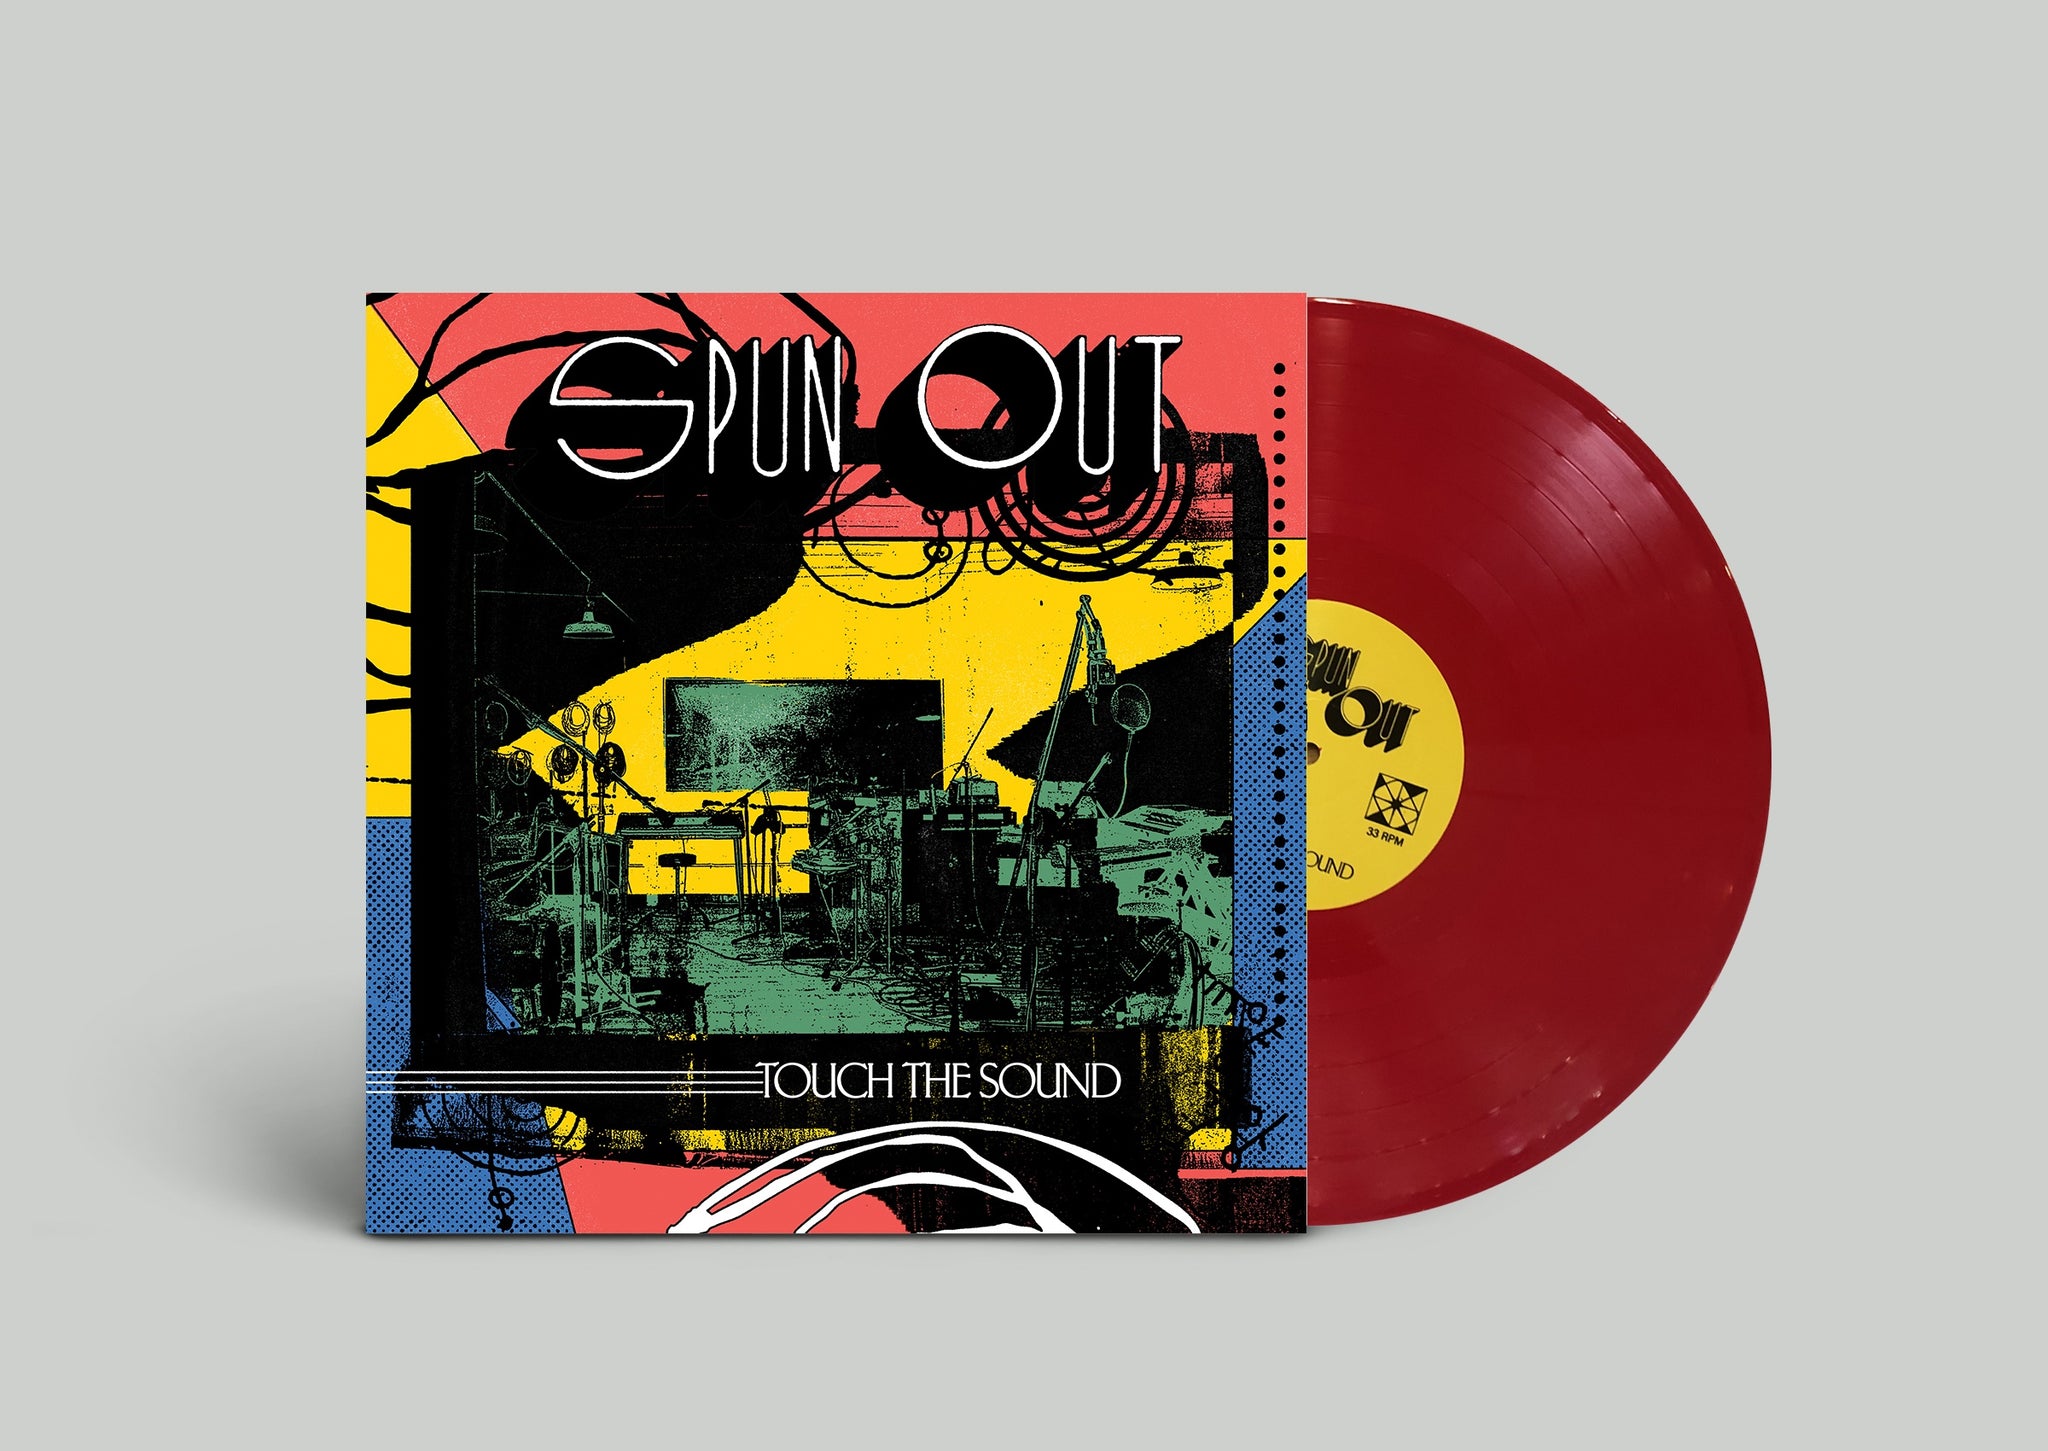 Spun Out ‎– Touch the Sound - New LP Record 2020 silveradocustomhomesinc Raspberry Red Vinyl, Numbered & Insert - Linz Indie Rock / Pop Rock / Psychedelic Rock